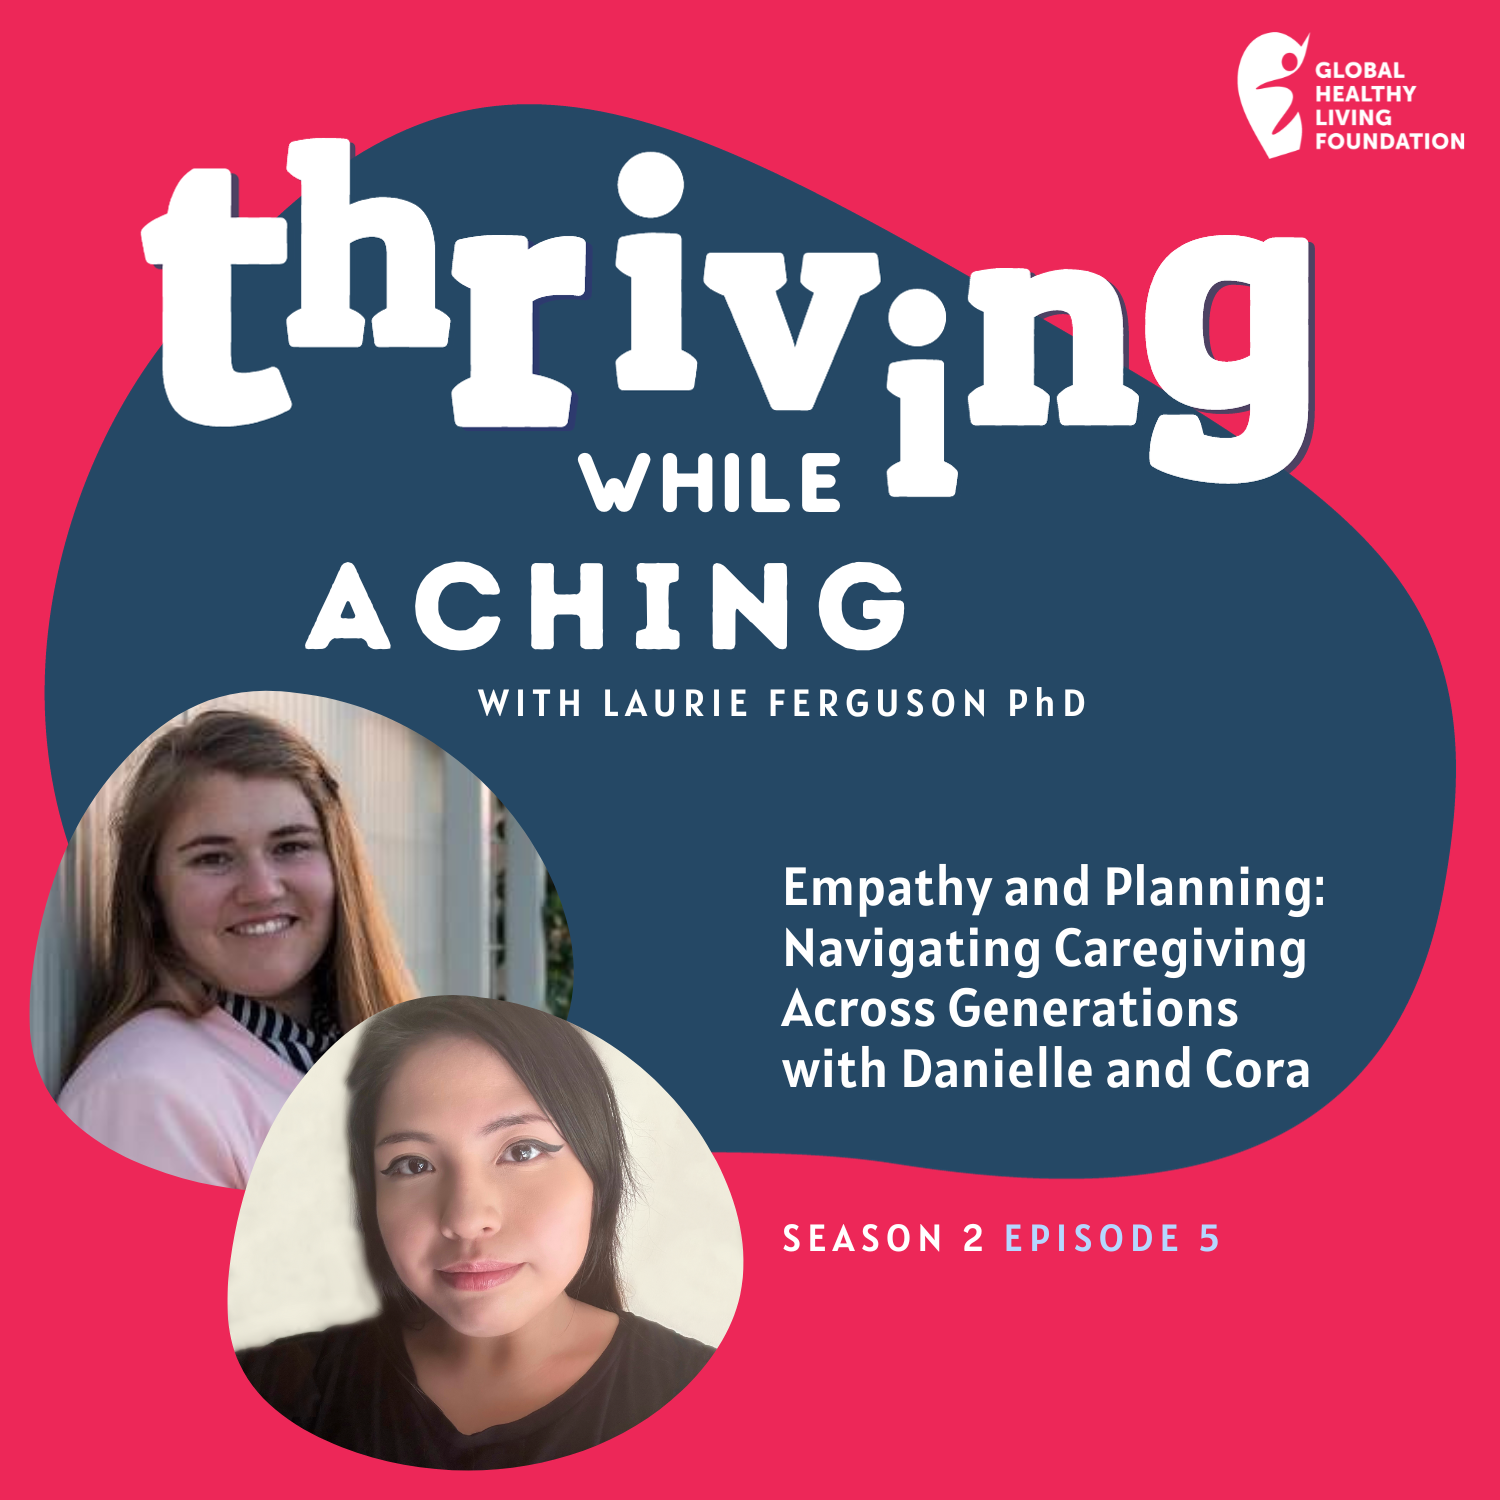 S2, Ep 5- Empathy and Planning: Navigating Caregiving Across Generations with Danielle and Cora